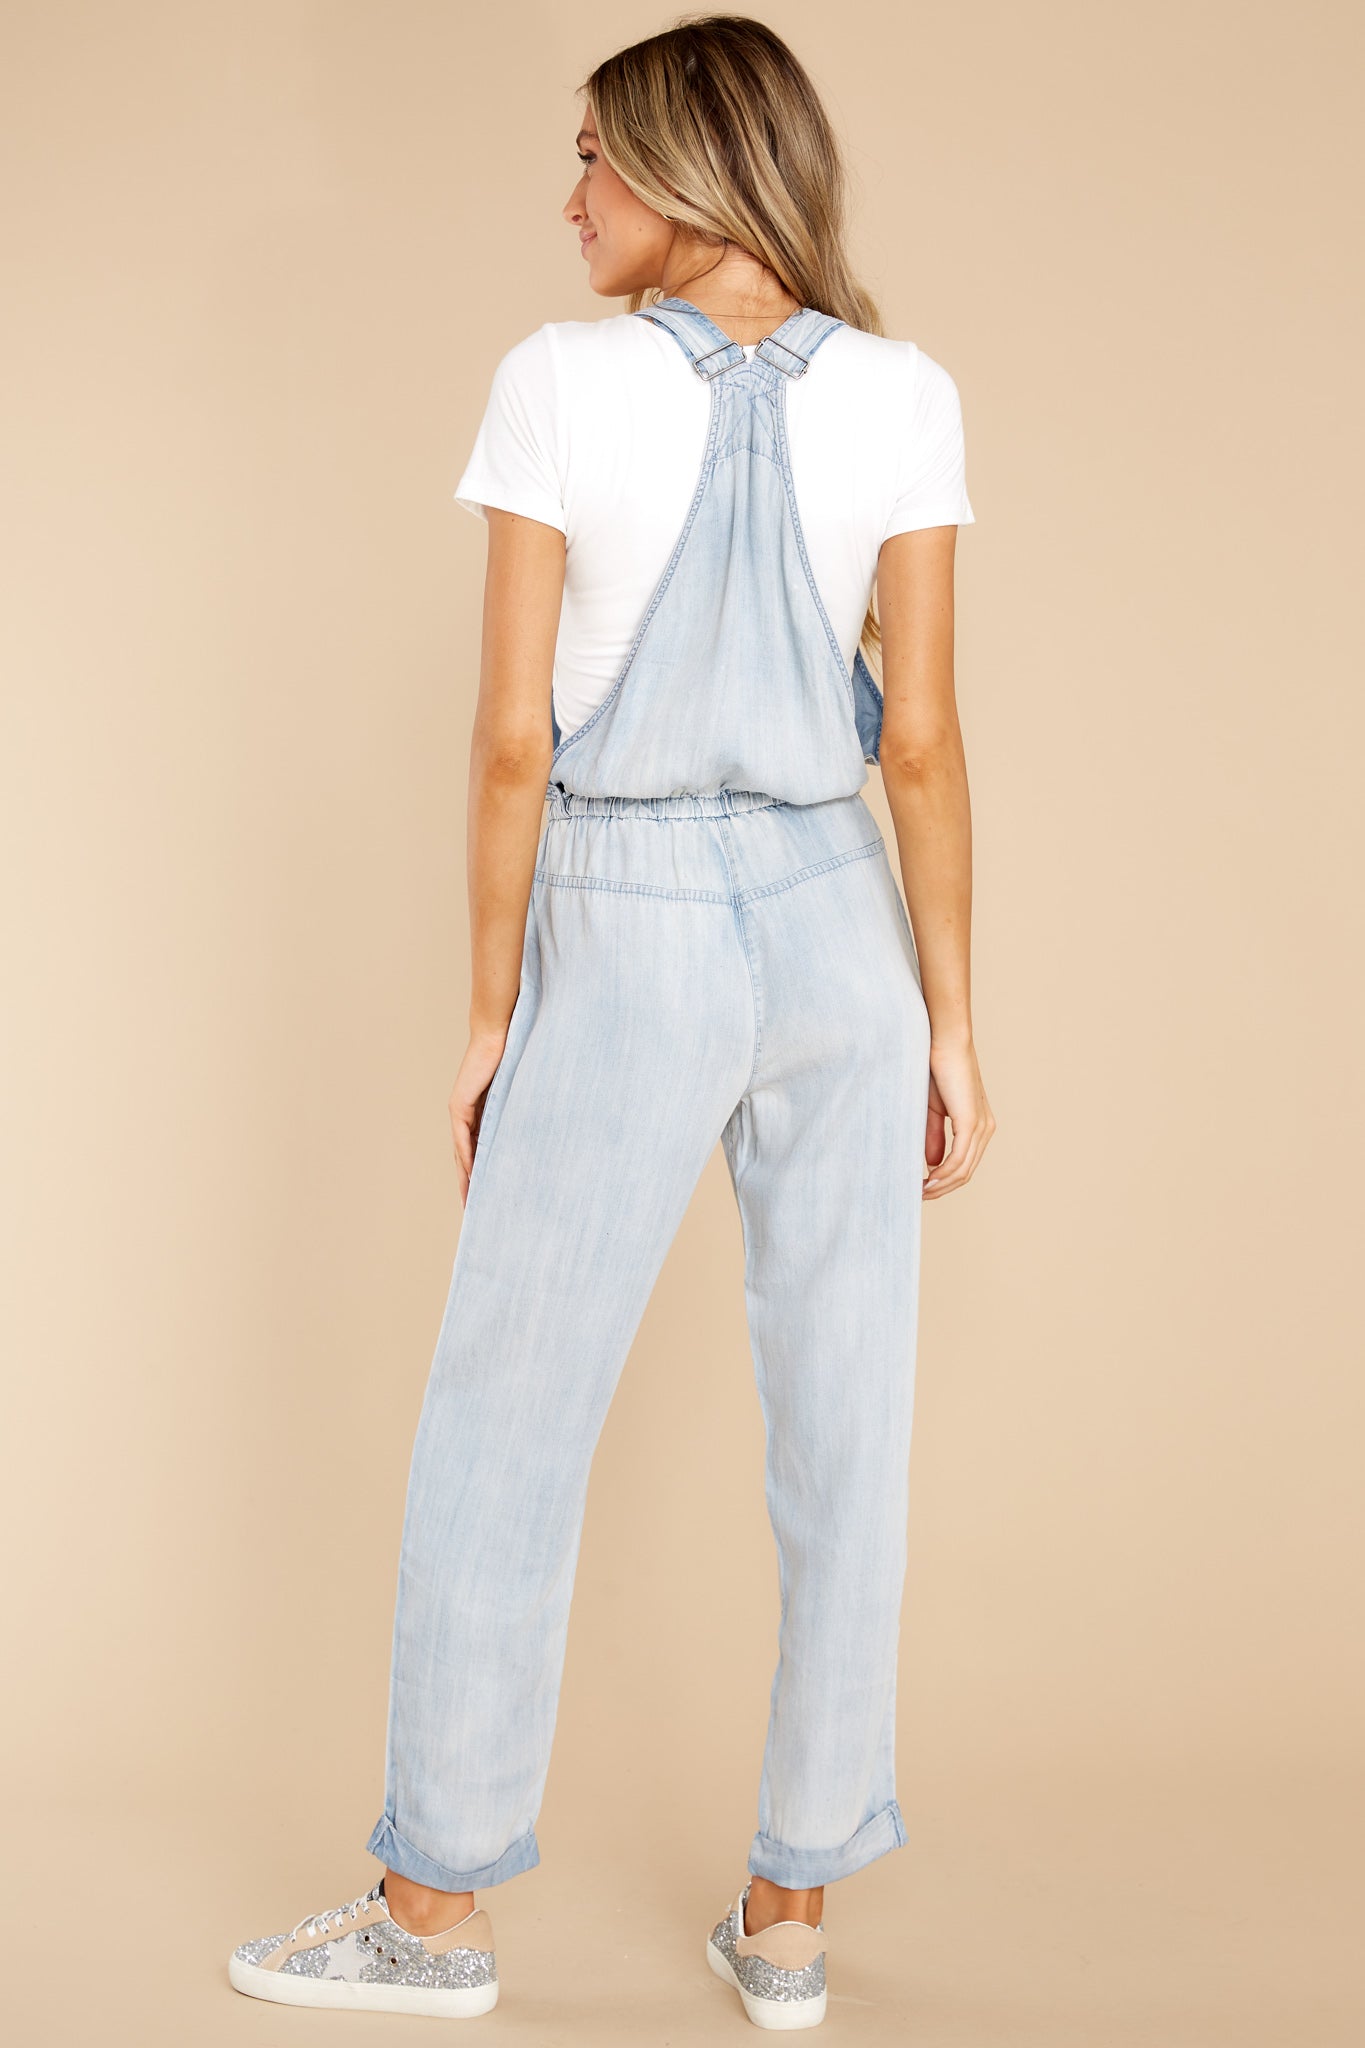 7 More Than Enough Light Chambray Overalls at reddress.com